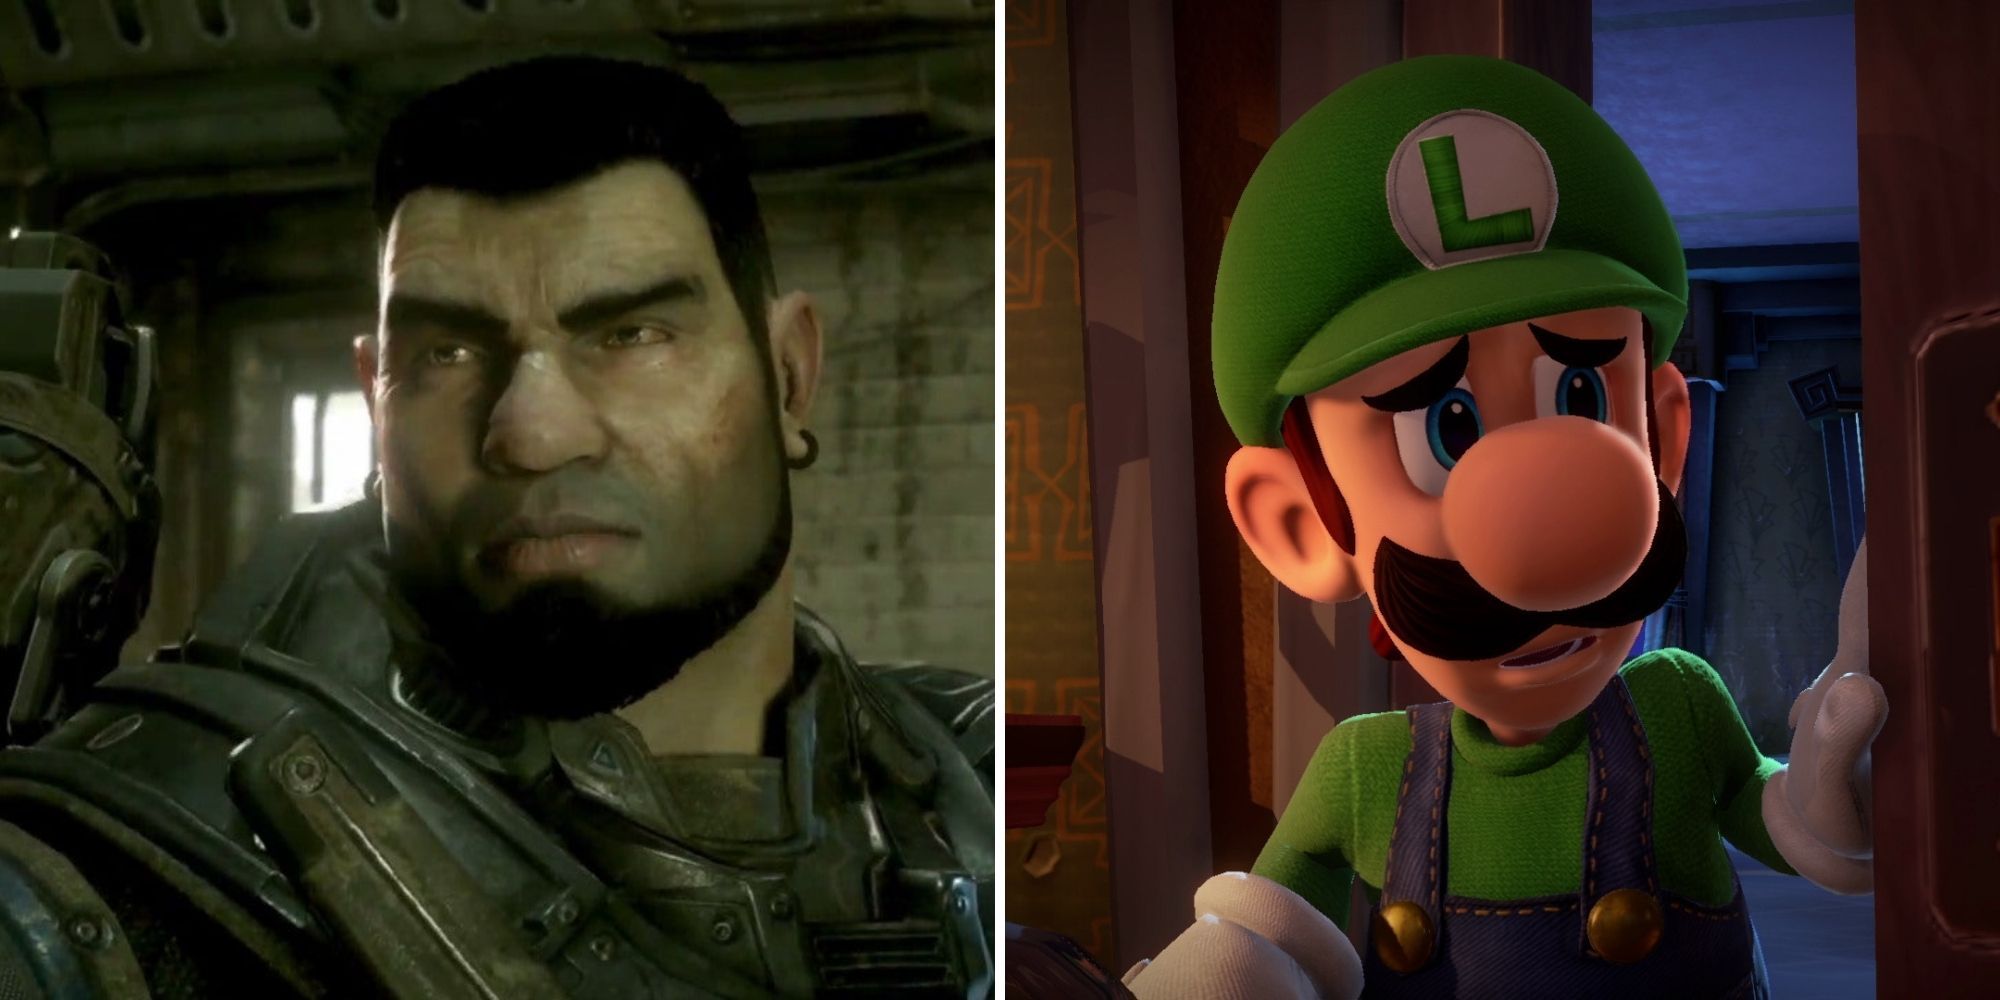 Header image featuring Dom from Gears of War and Luigi from Mario